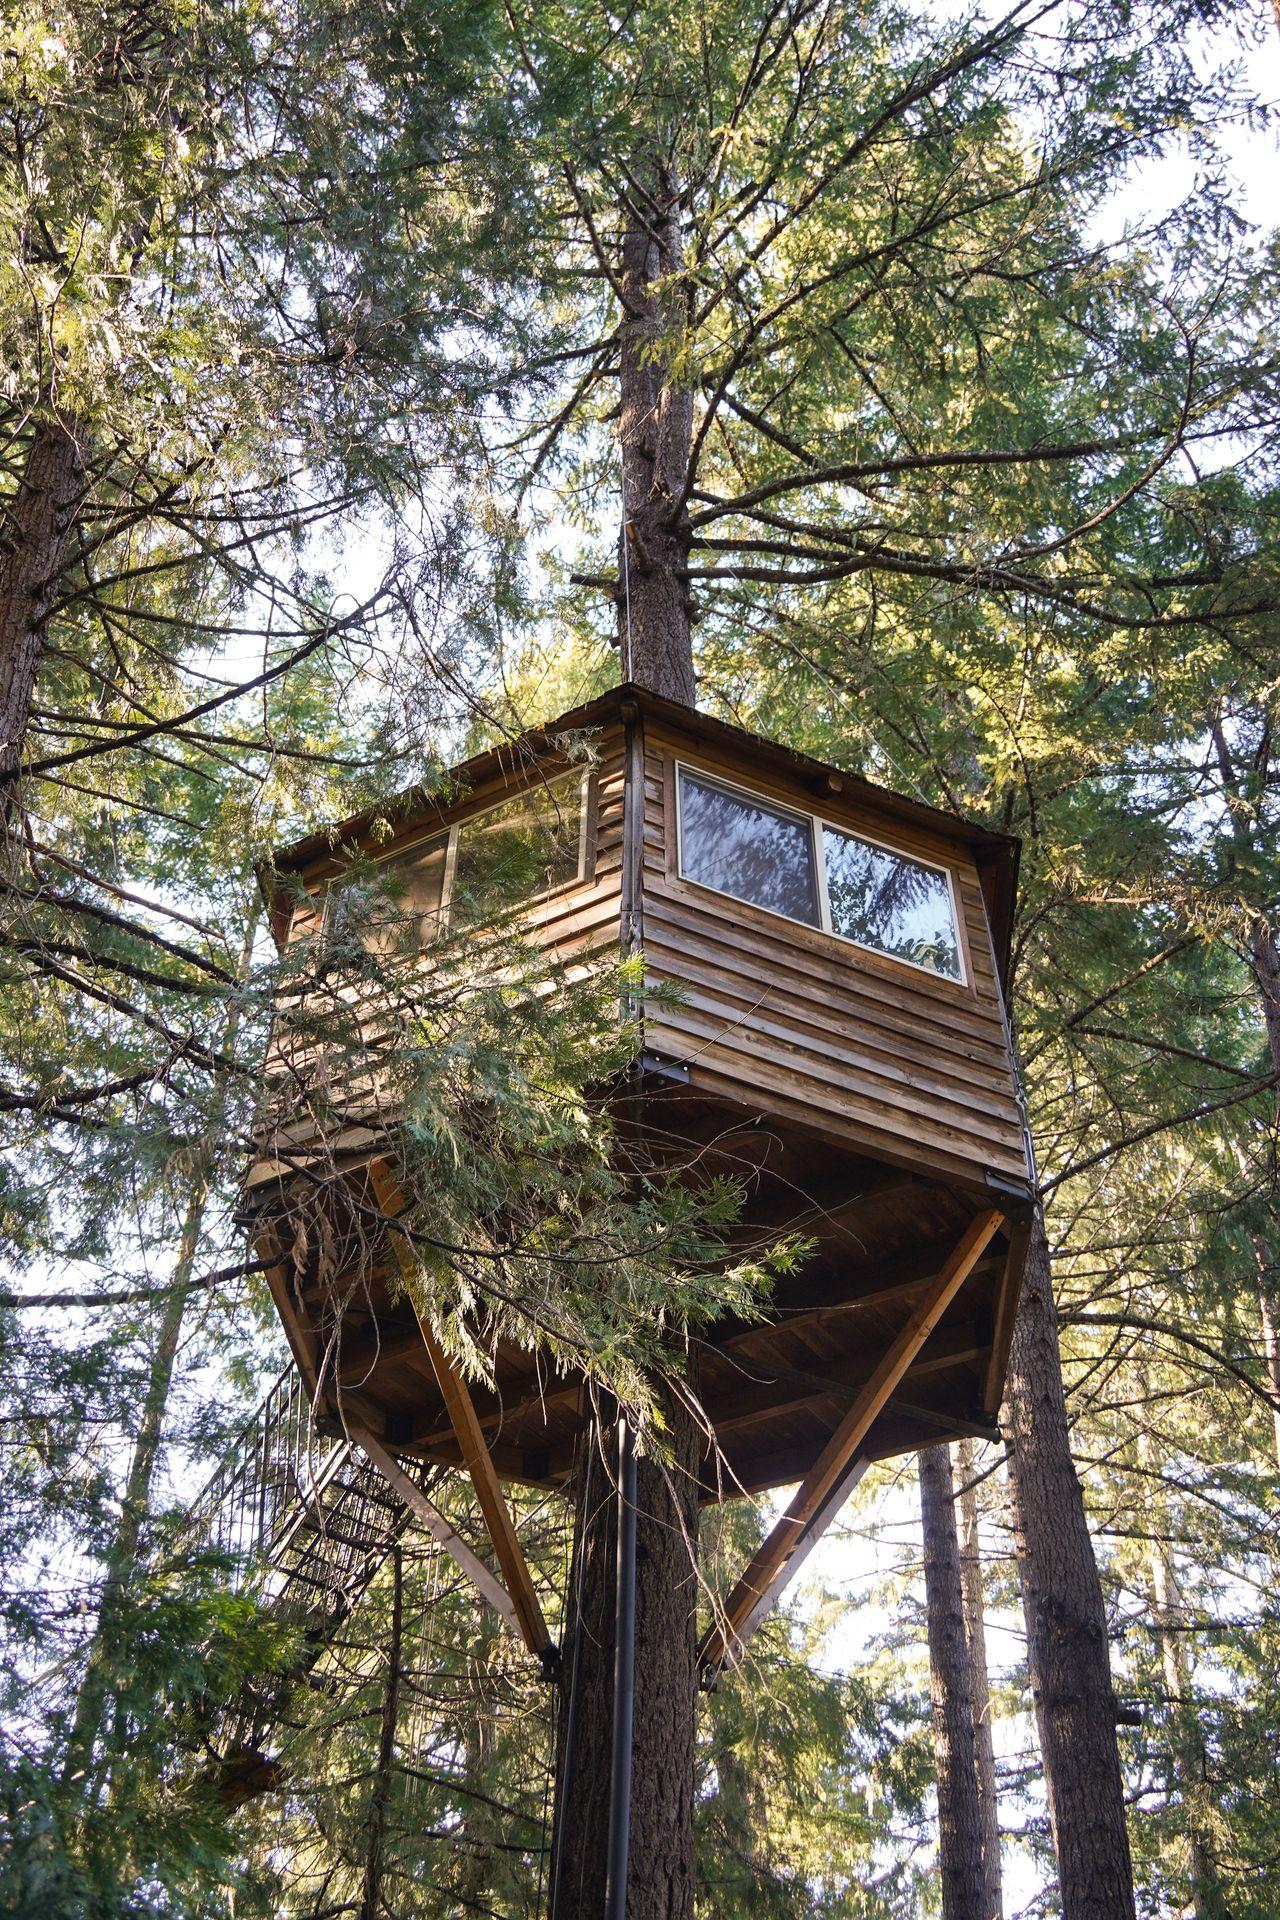 Looking up at a suspended cabin on a tree